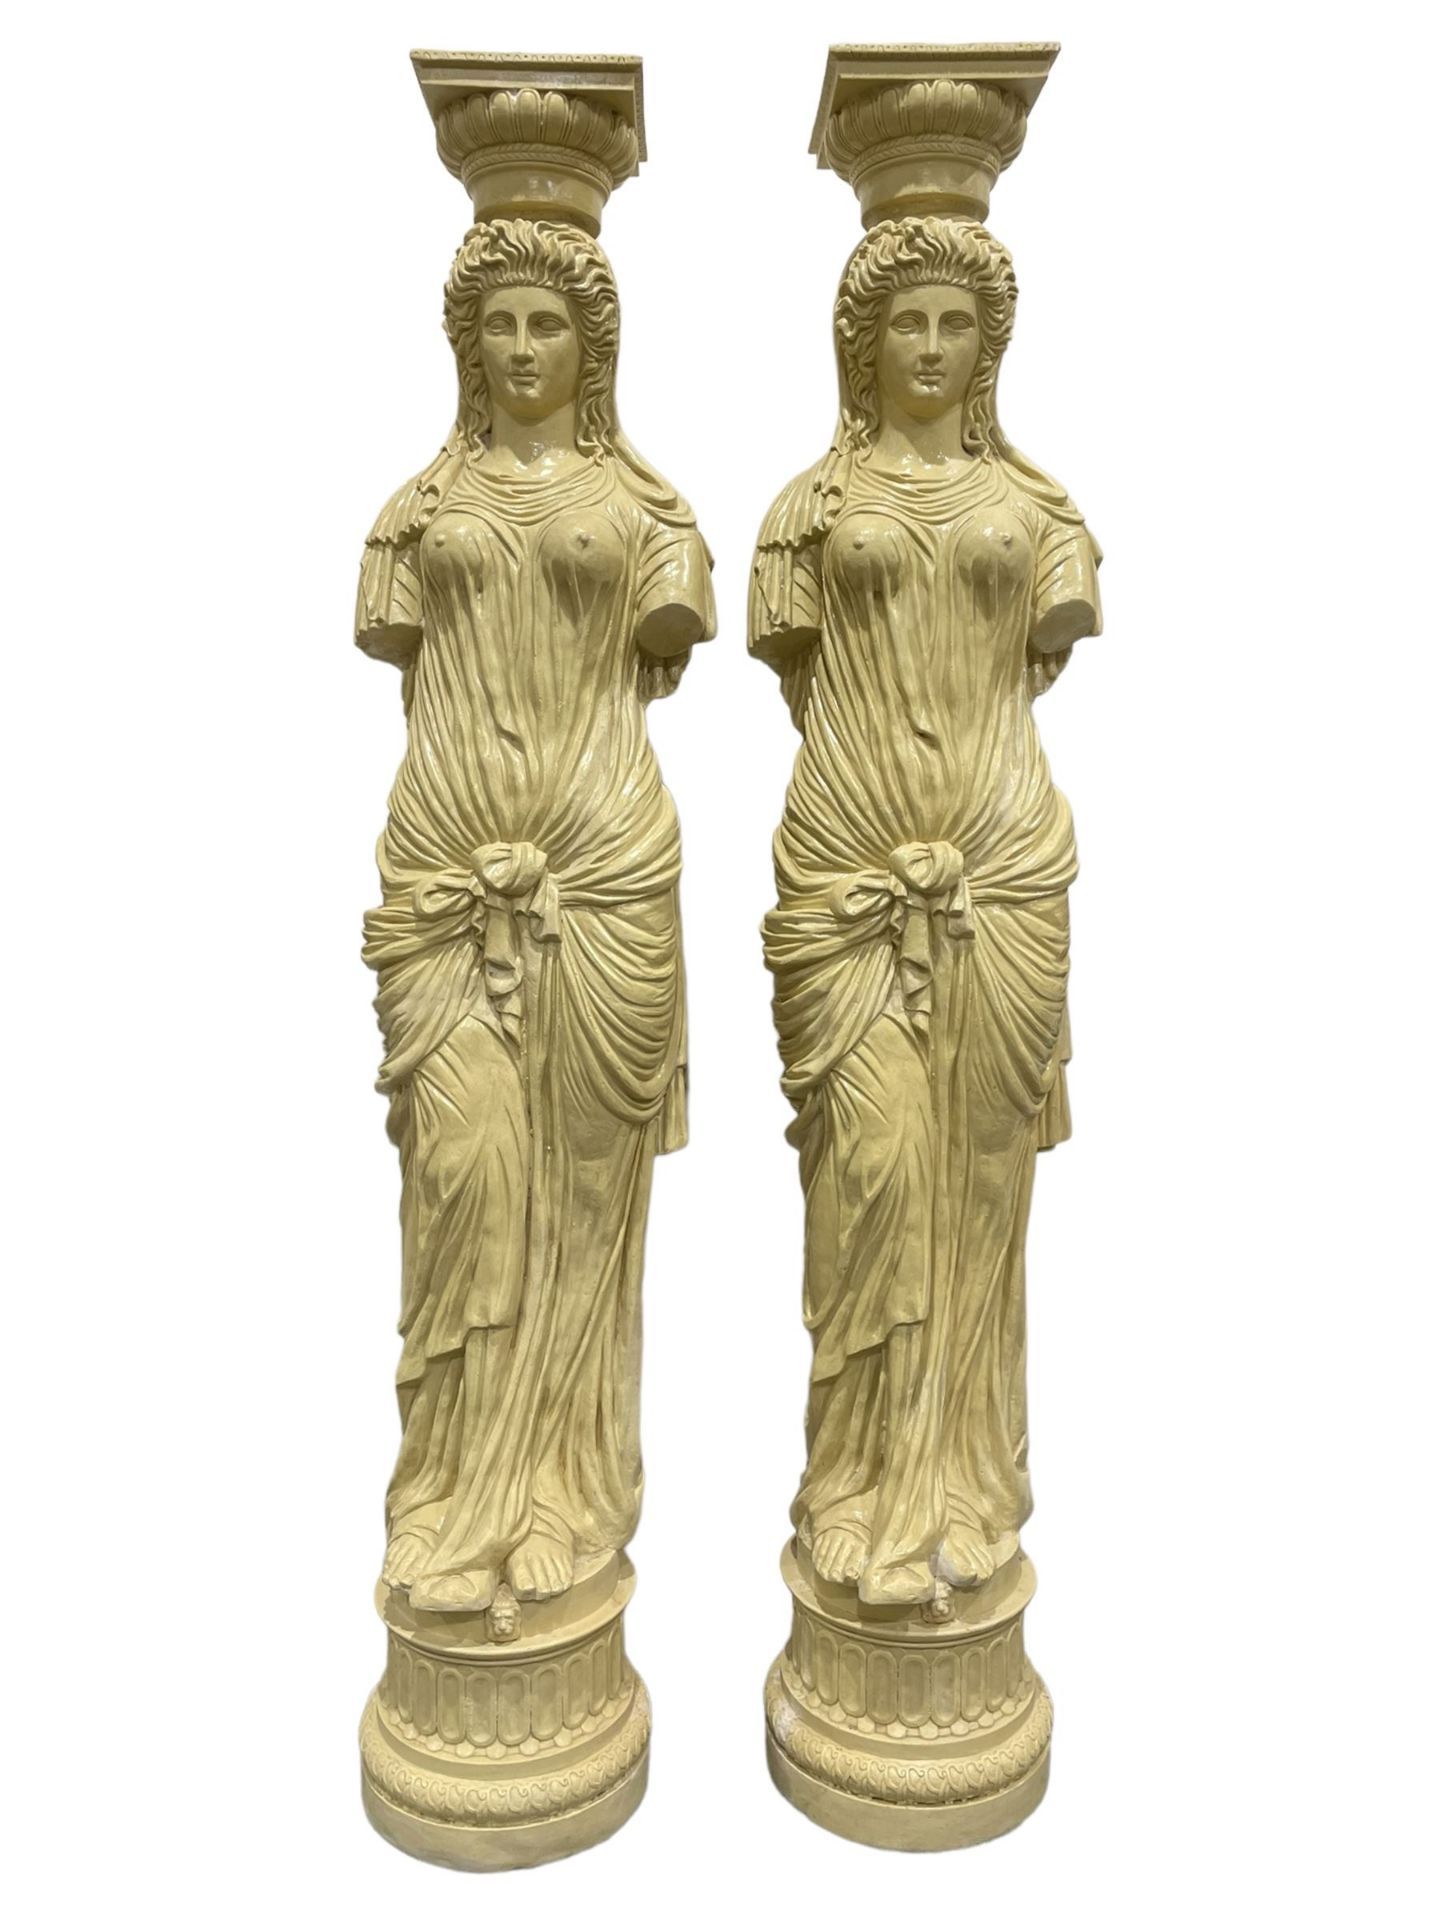 A Pair Of Greek Style Caryatid Columns, Square Top With Gadroon Underbelly, The Semi-Nude Female - Image 8 of 8